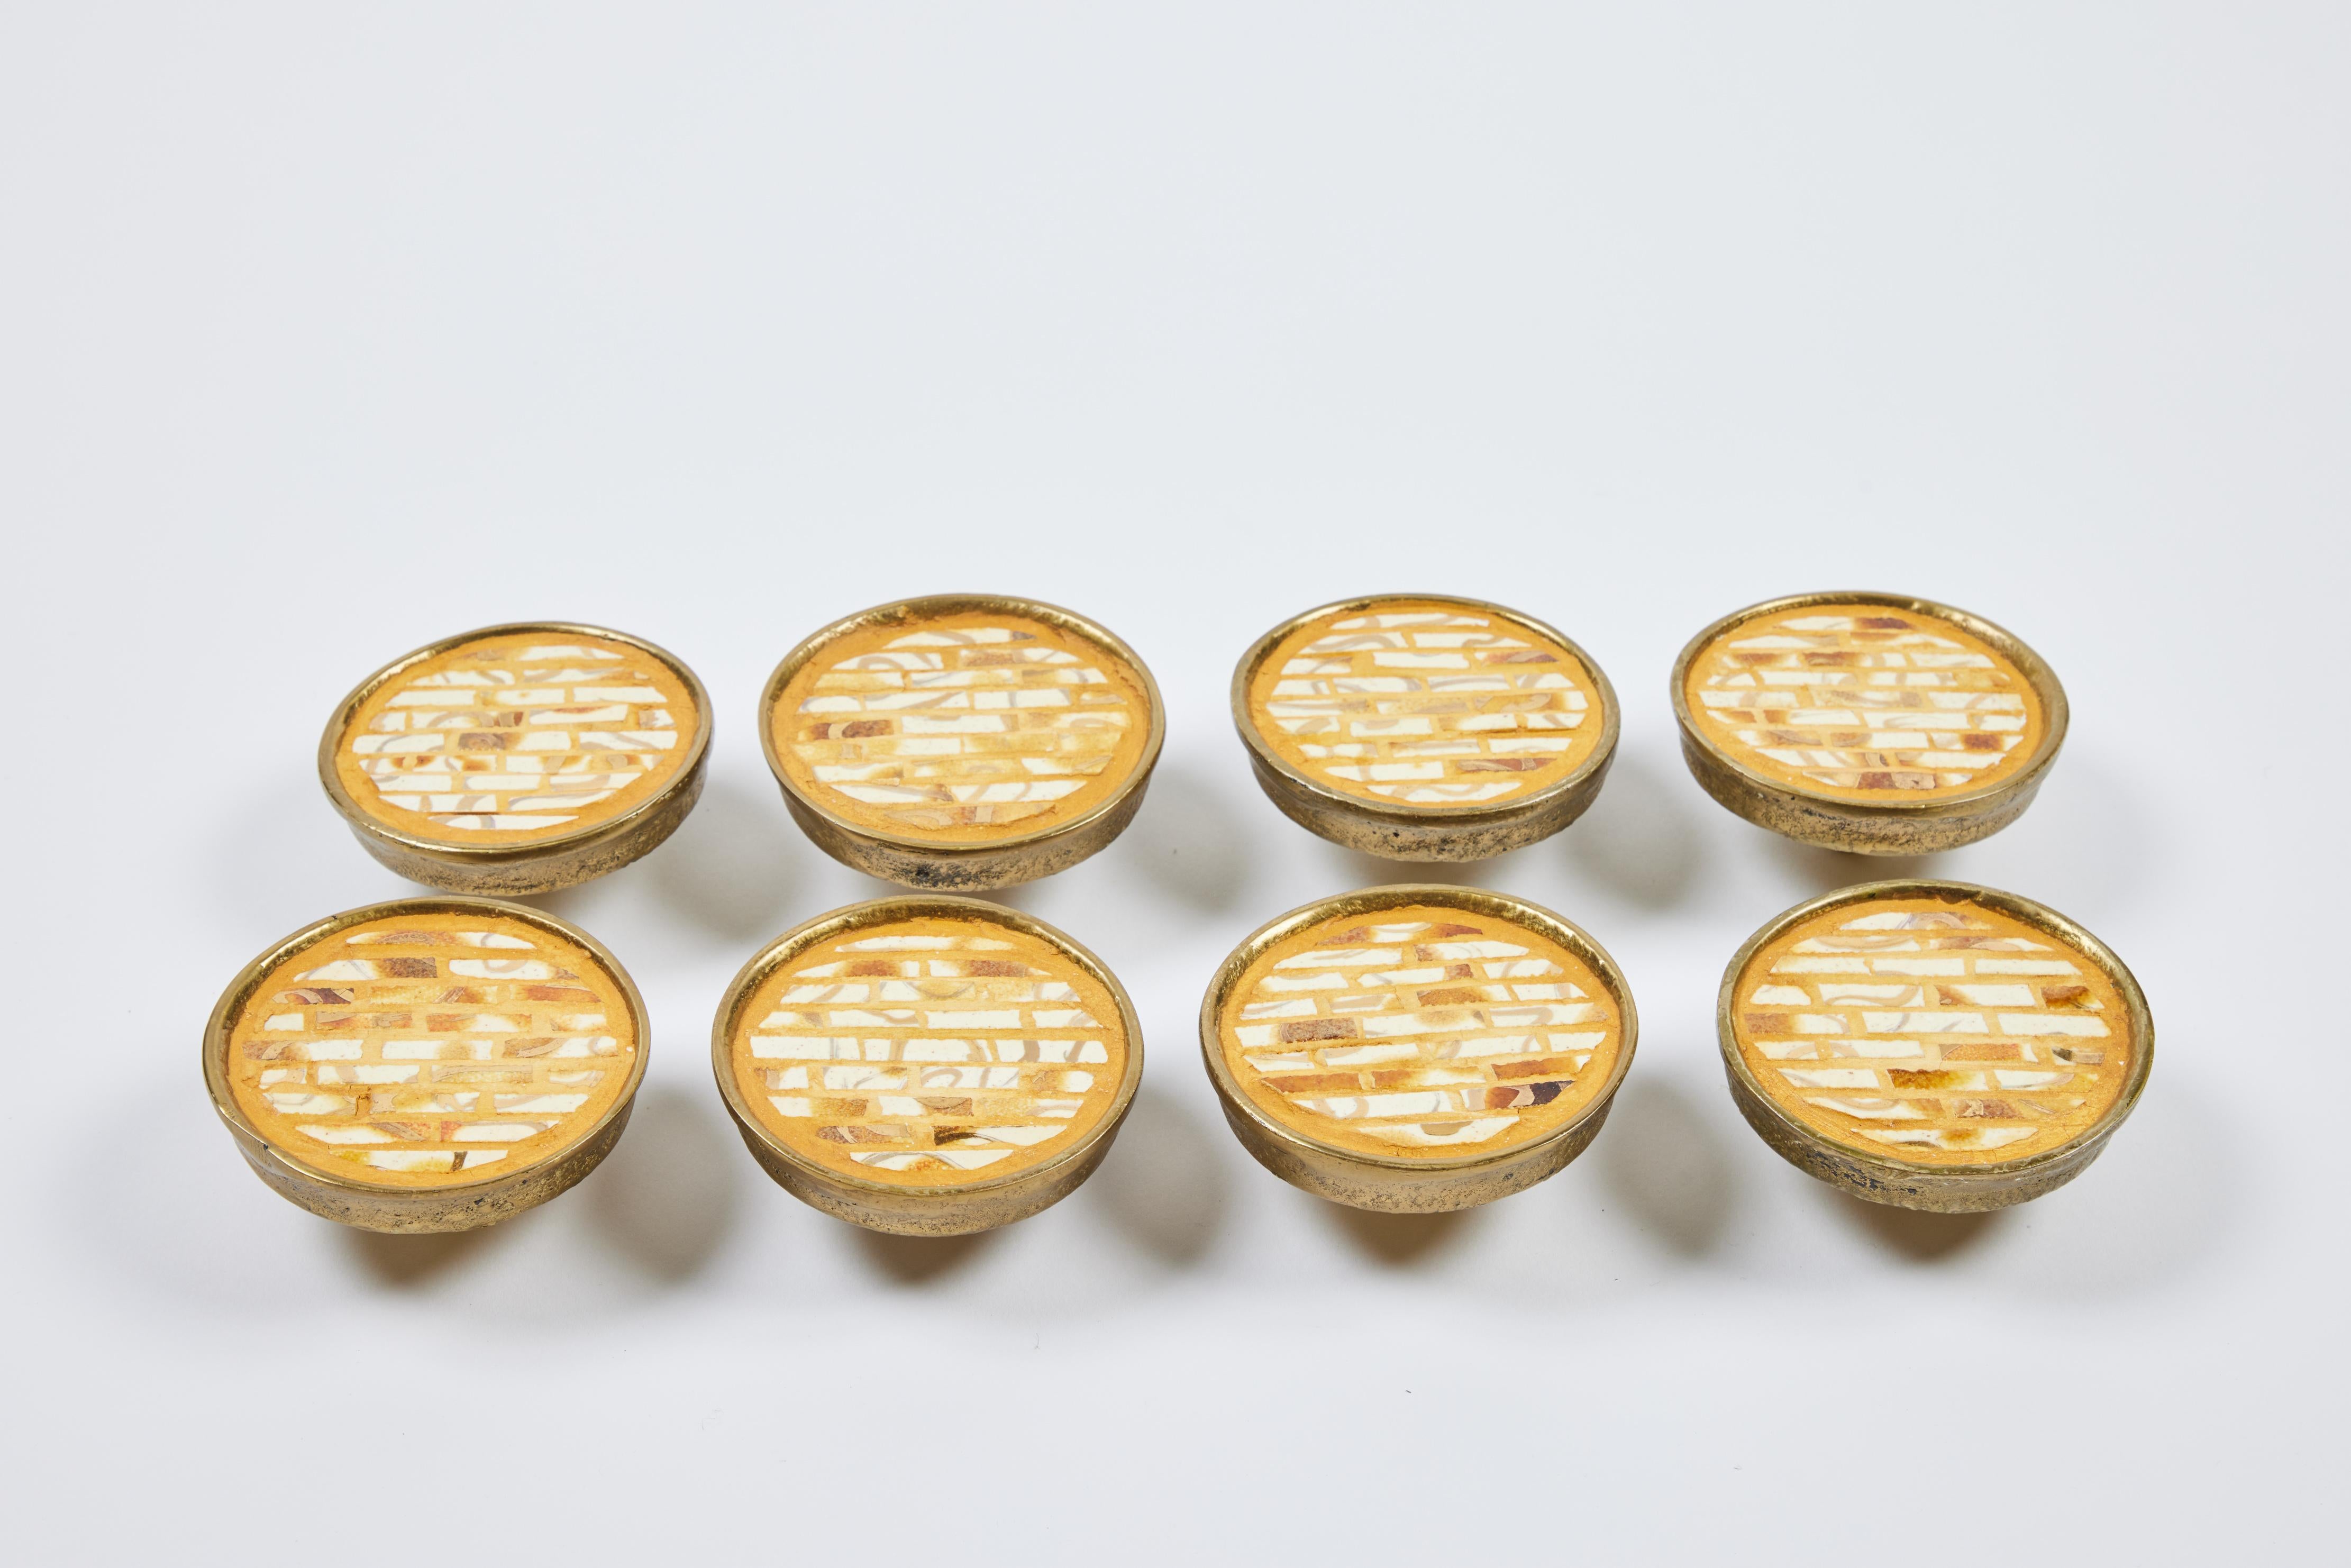 Check out this alluring set of 10 large heavy textured brass round drawer/cabinet pulls that were made in Mexico. They are inlaid with a beautiful white and gold glazed tile mosaic and will certainly be the the accent attraction to any door or piece